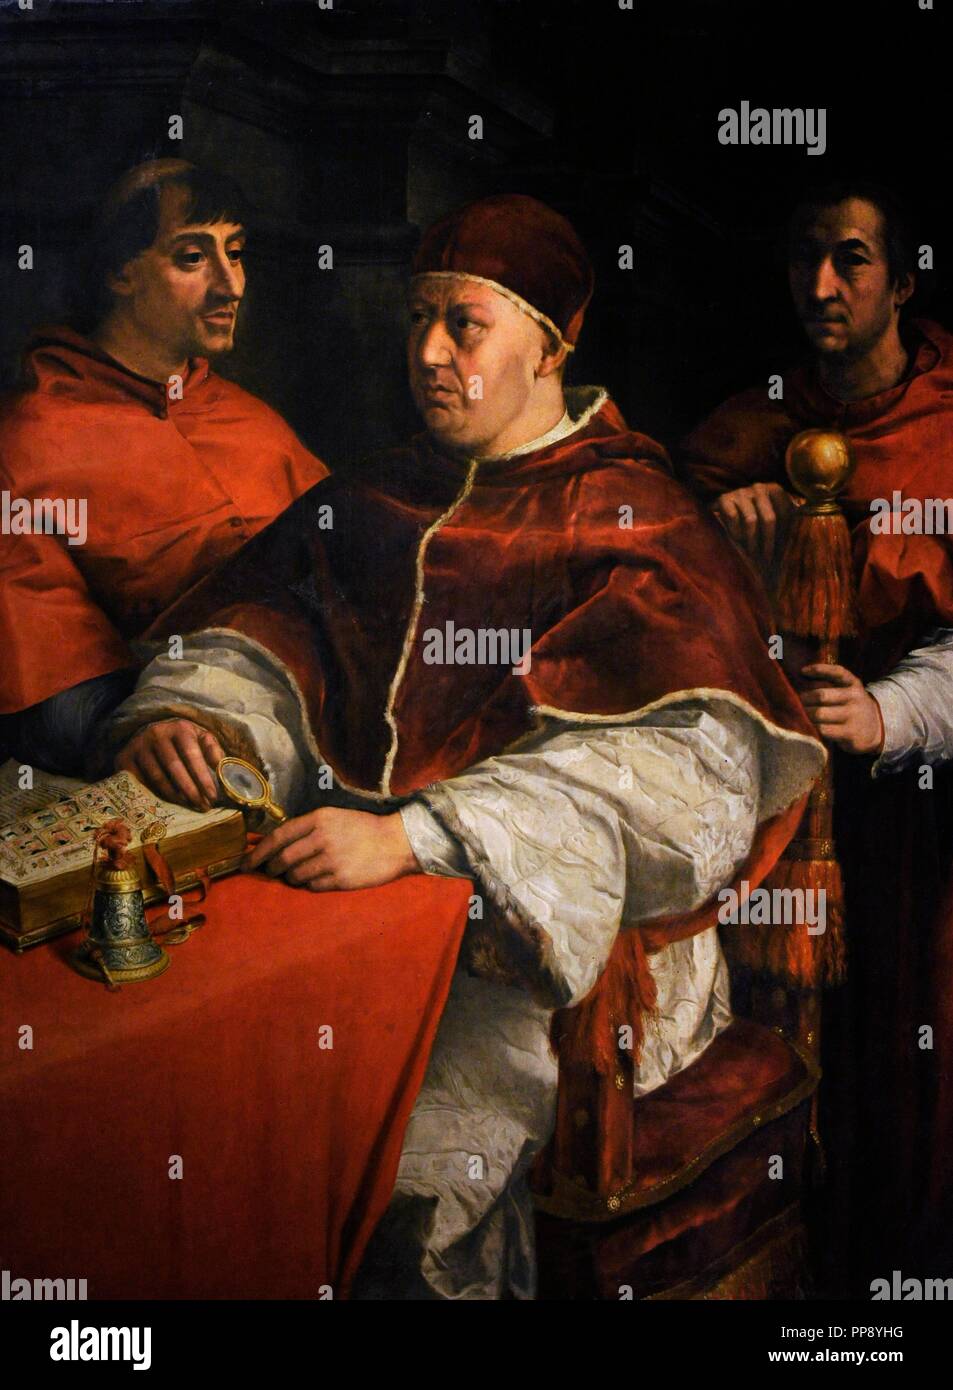 Pope Leo X (1475-1521). Portrait of Leo X with two cardinals, 1525. Painting by Andrea del Sarto (1486-1530), copy after Raphael. Farnese Collection. National Museum of Capodimonte. Naples. Italy. Stock Photo